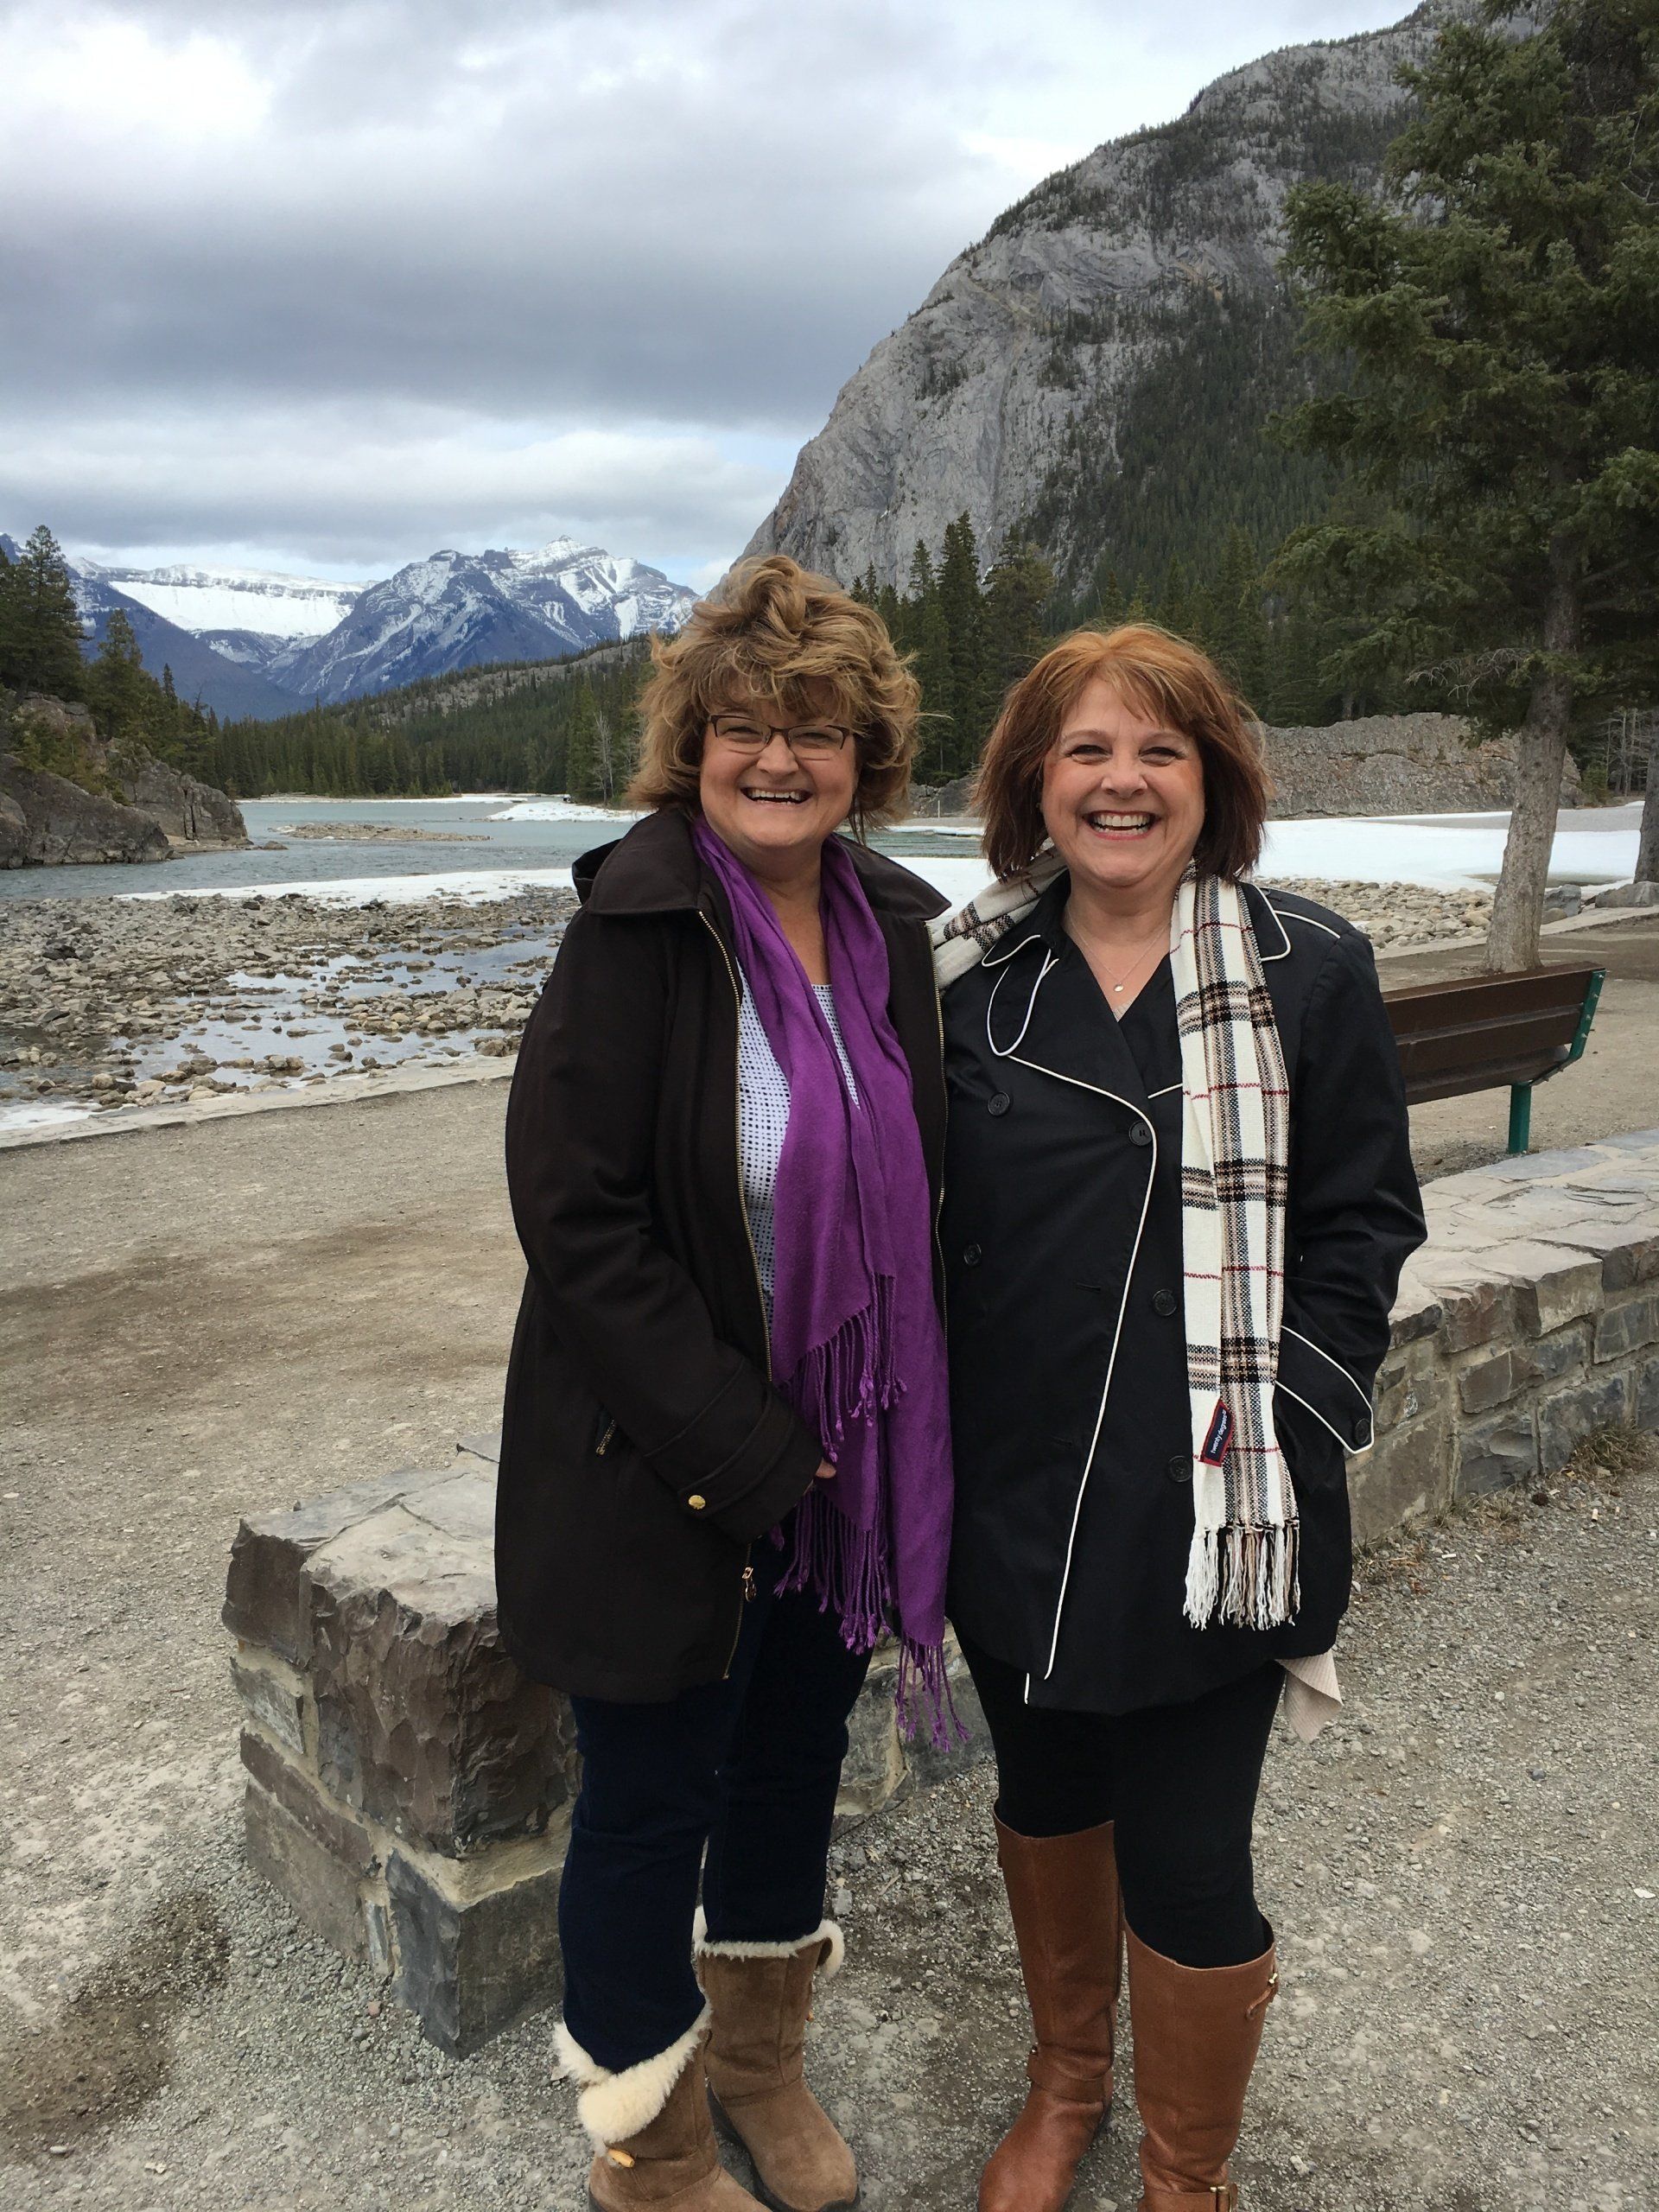 photo of Dianah Davidson and Mary Billings on a trip in the mountains wearing scarves